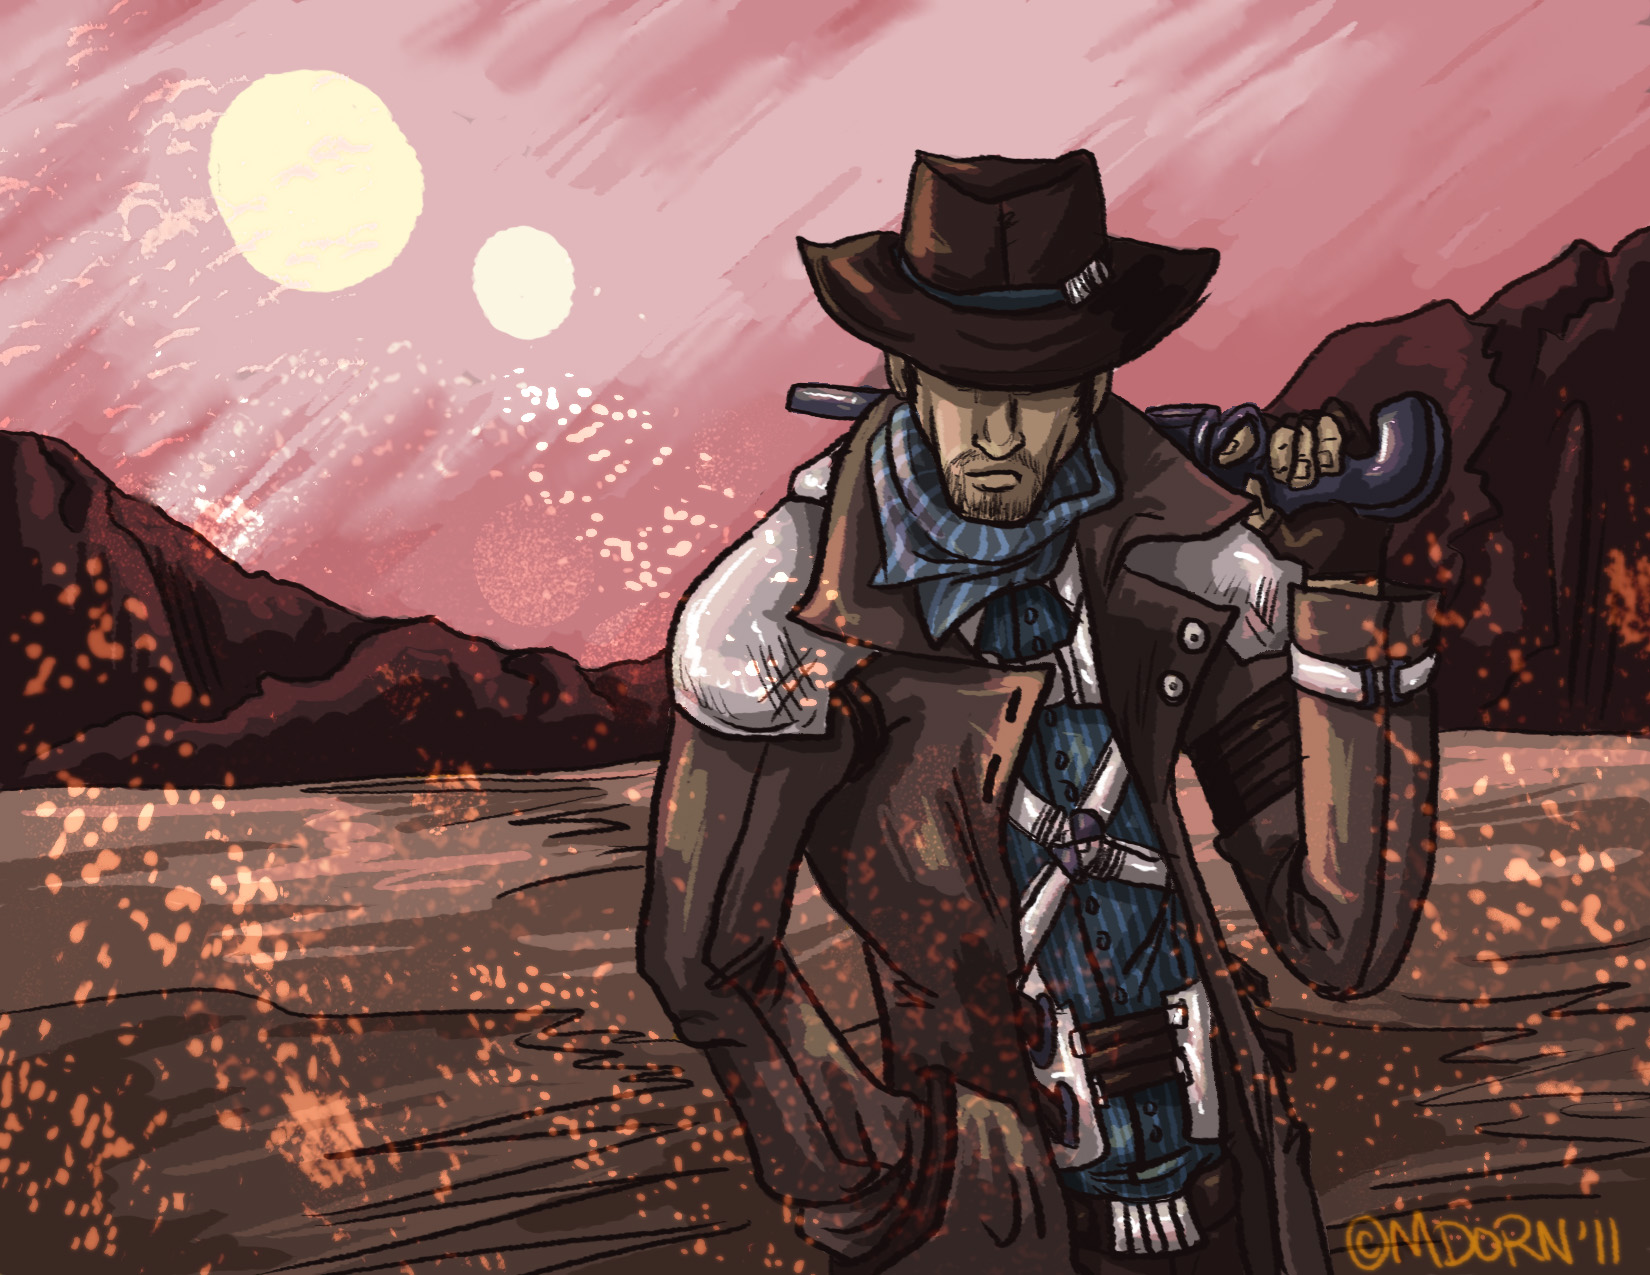 space_cowboy_just_played_that_track__by_sargon_the_dark-d4ir4bl.jpg